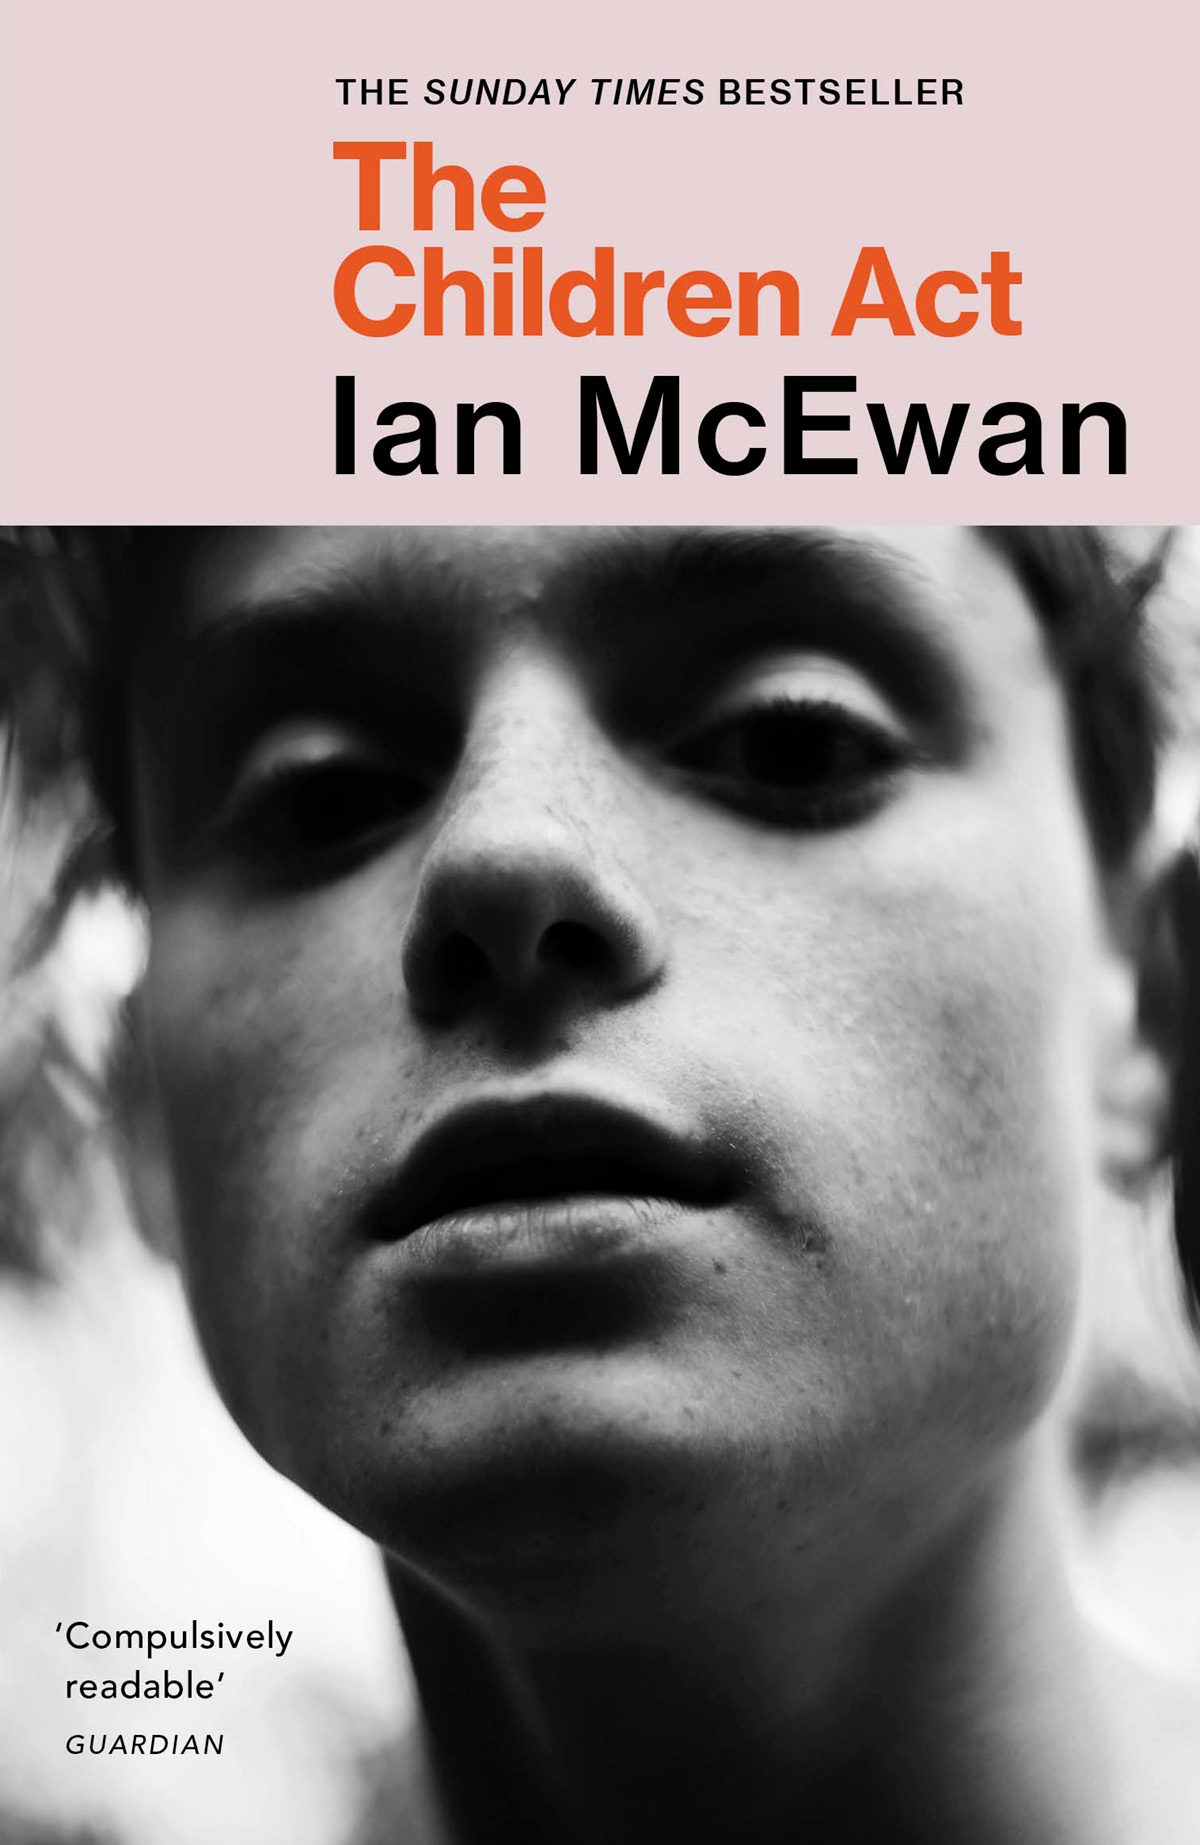 Cover of The Children Act by Ian McEwan showing a black and white close up portrait of a person's face gazing down at the camera